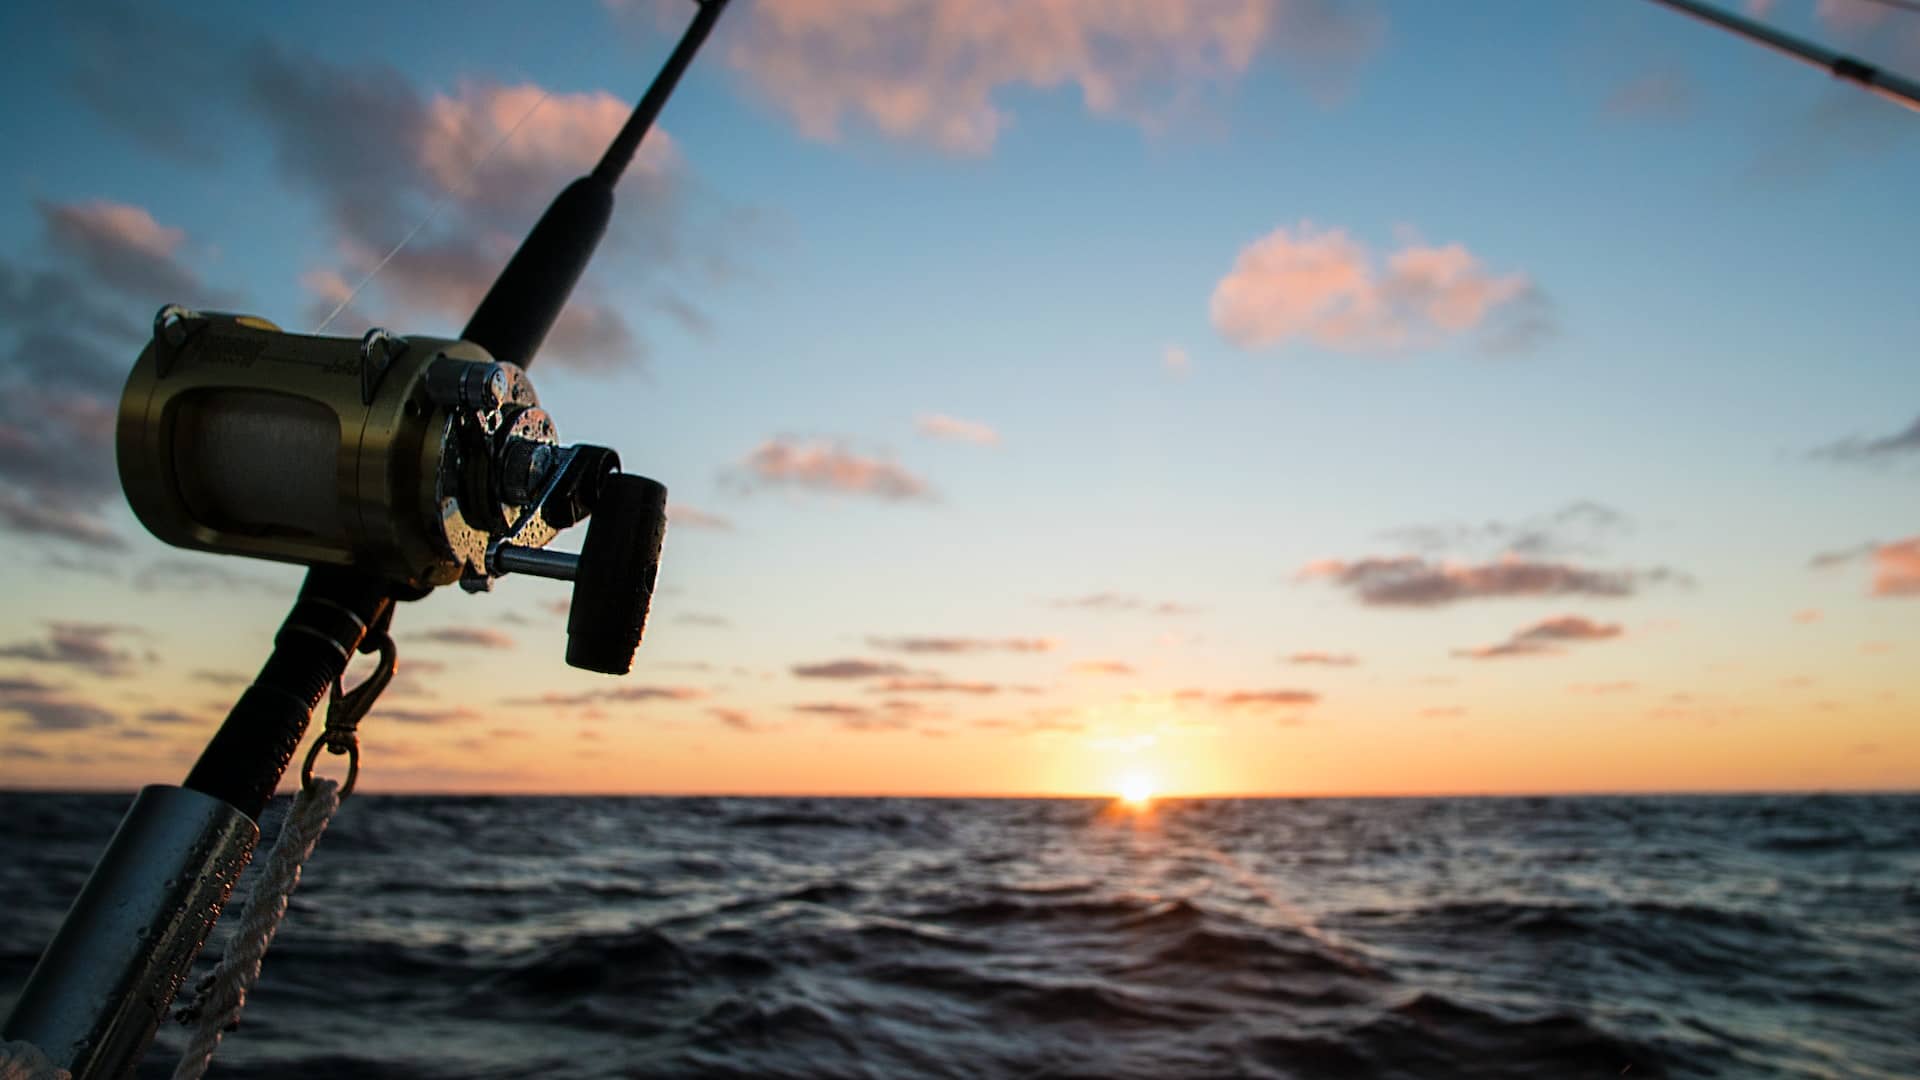 Master Offshore Trolling: Top 5 Techniques You Need to Know! (+Bonus Tip) 